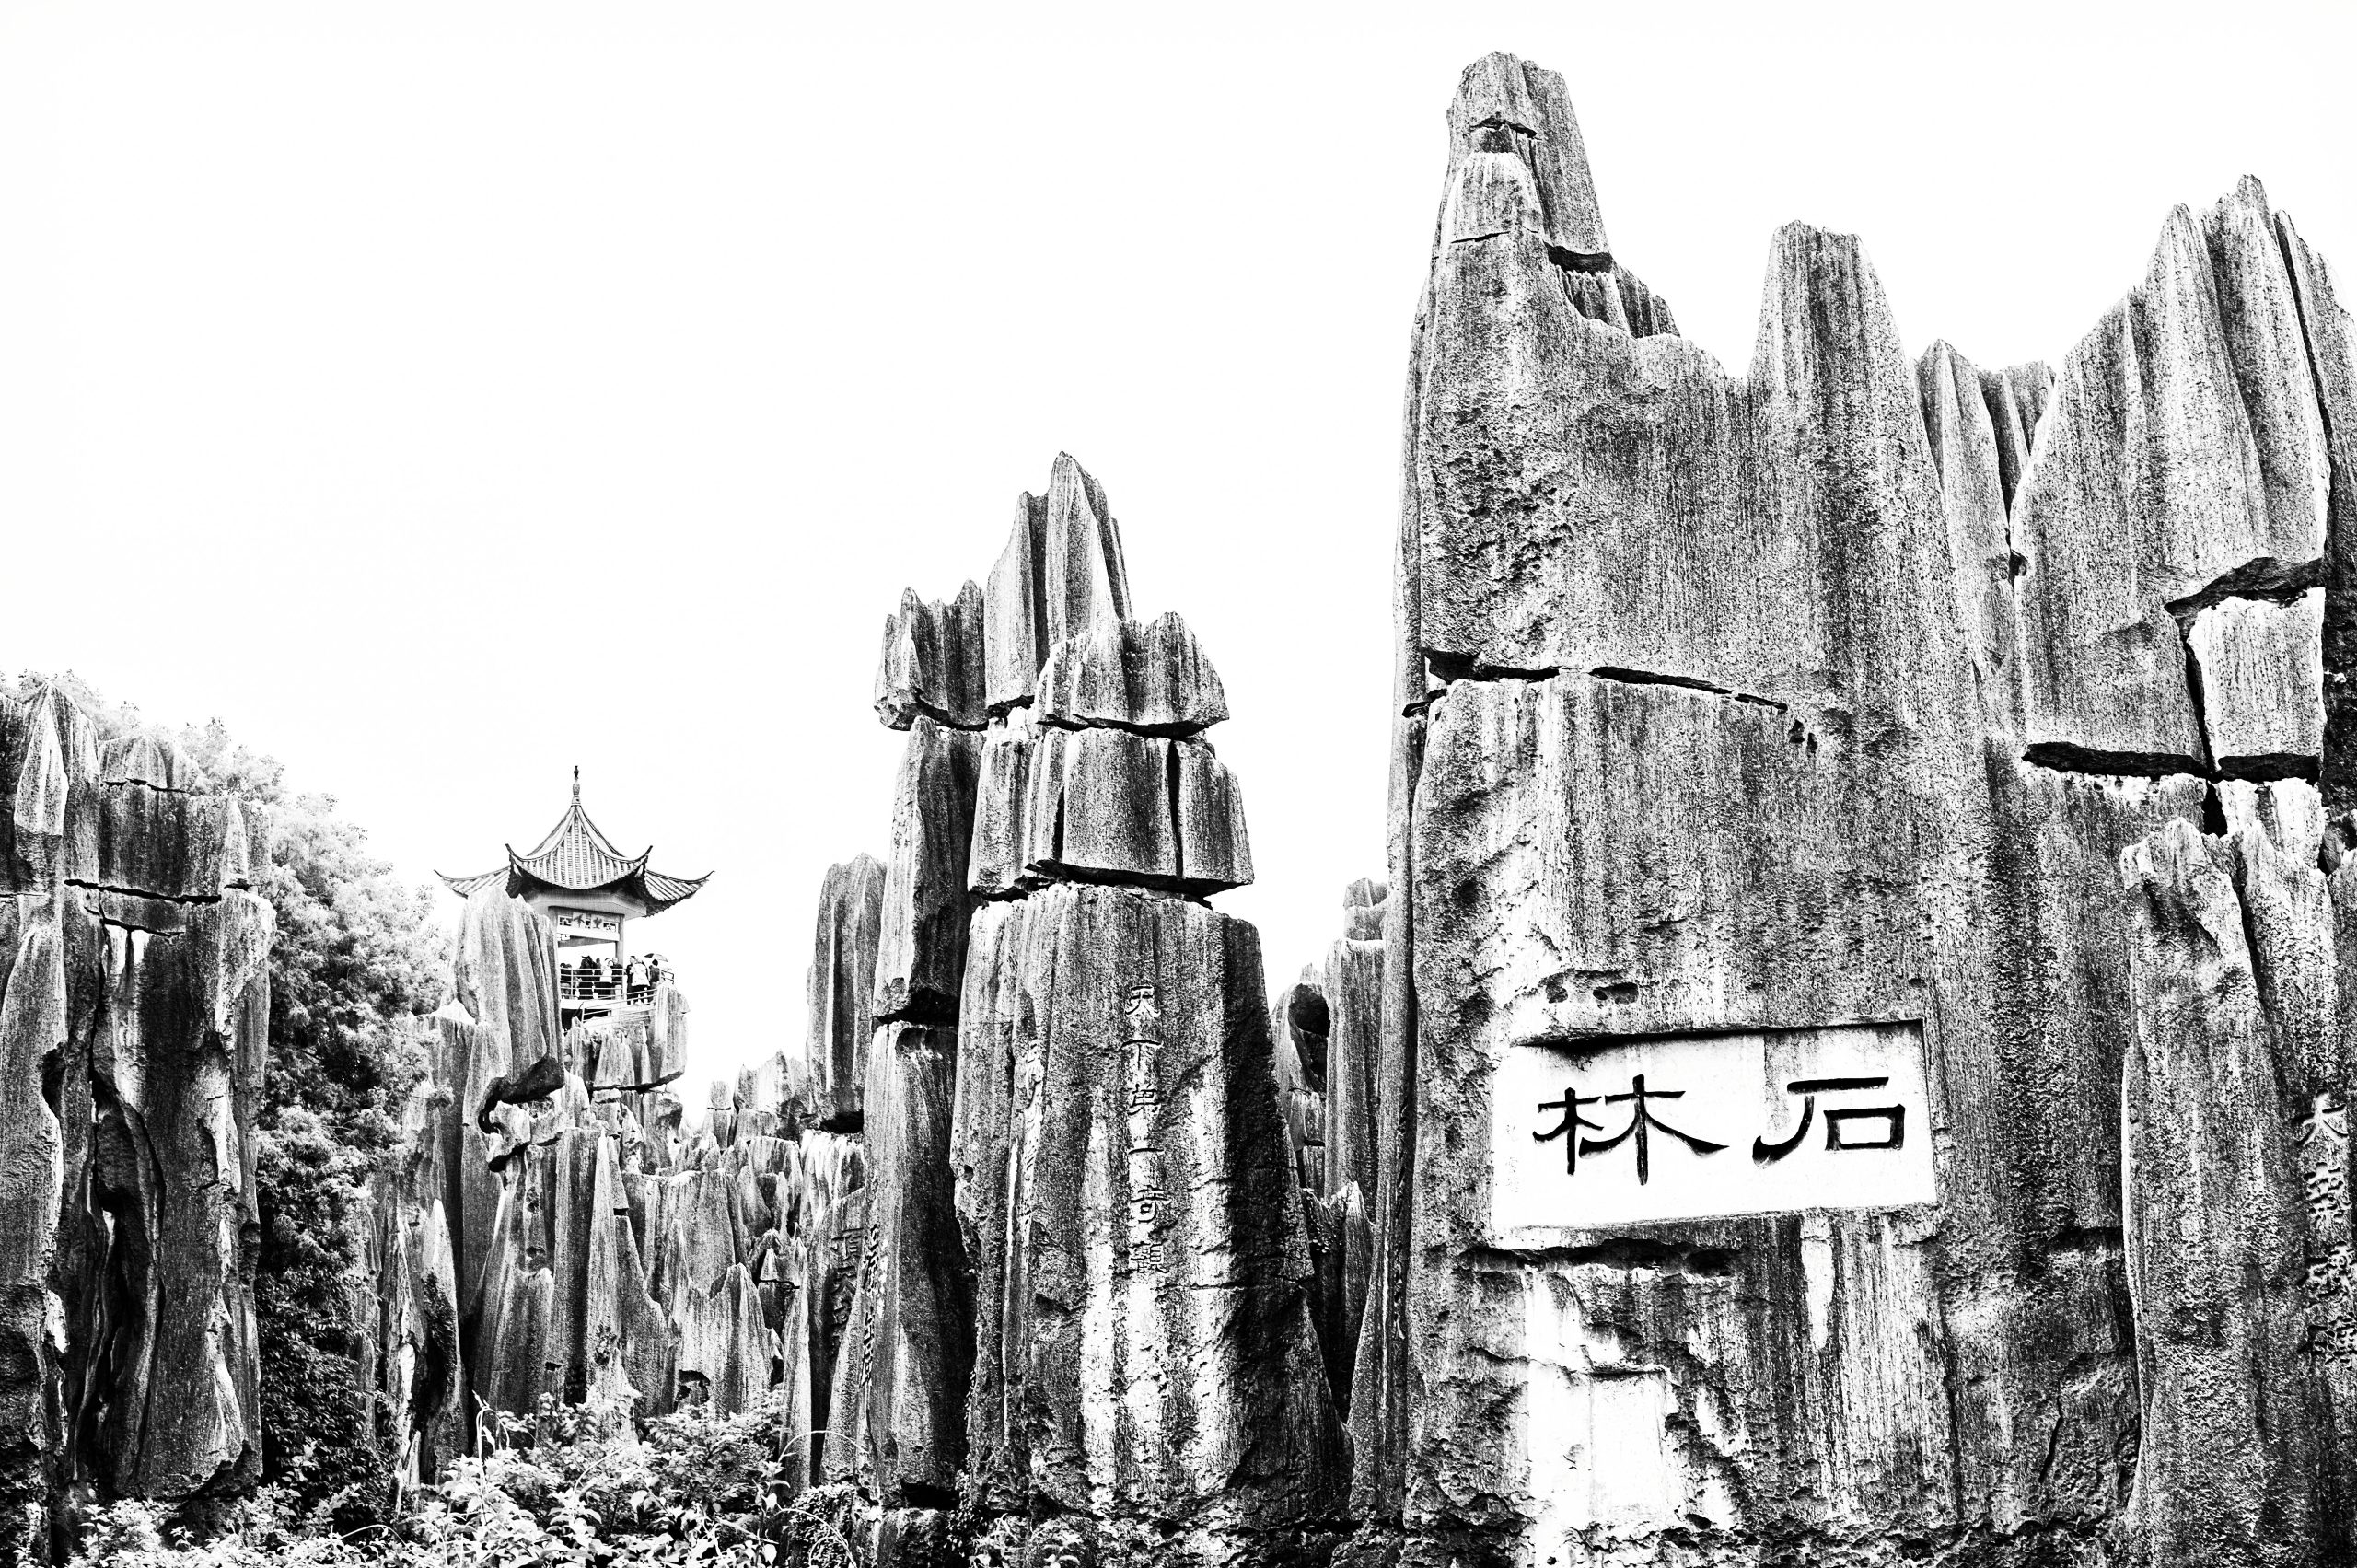 Shilin “Stone Forest”